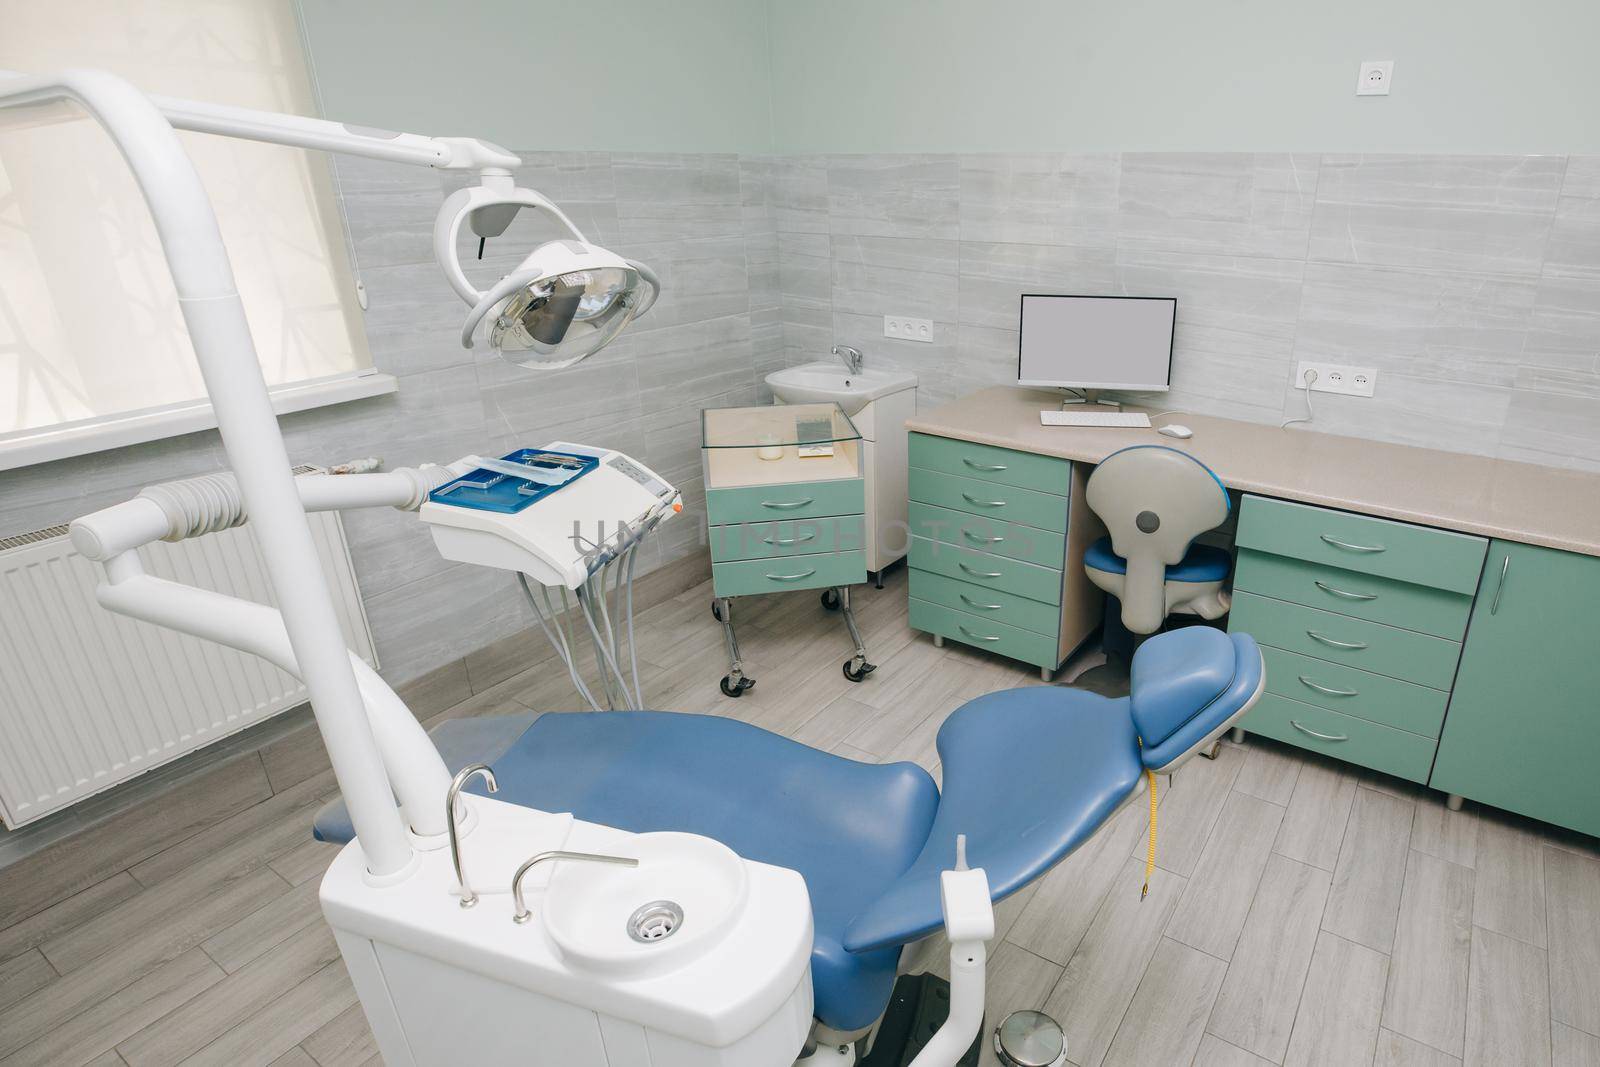 Dentist Office, Dental Hygiene, Dentist's Chair. Modern dental practice. Dental chair and other accessories used by dentists in blue, medic light